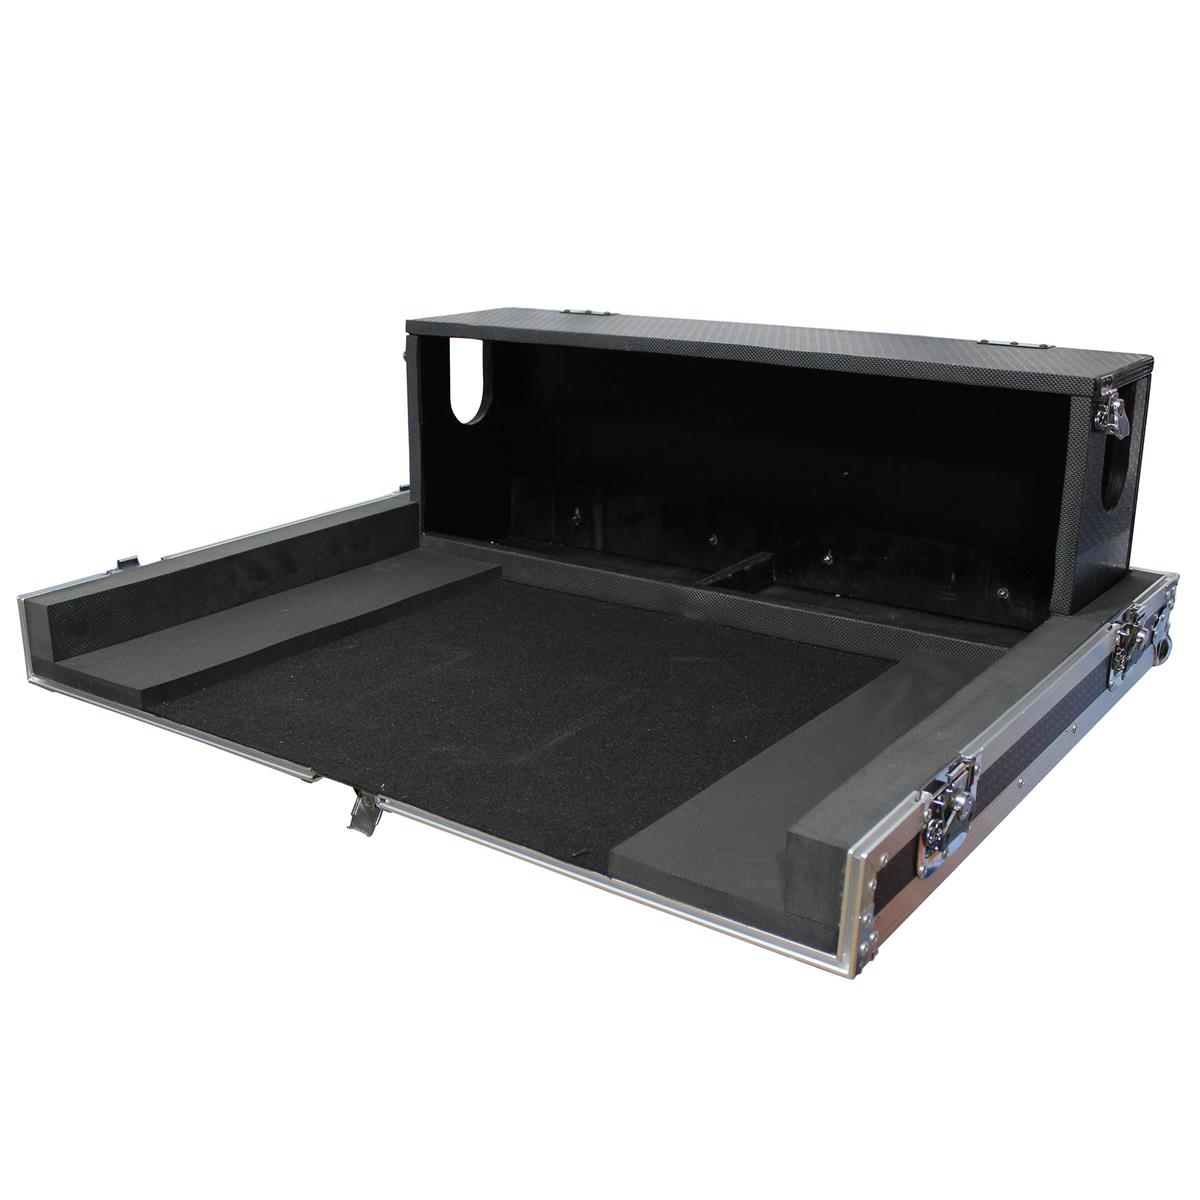 Image of ProX XS-YQL5 Case with Doghouse and Wheels for Yamaha QL5 Mixer Console